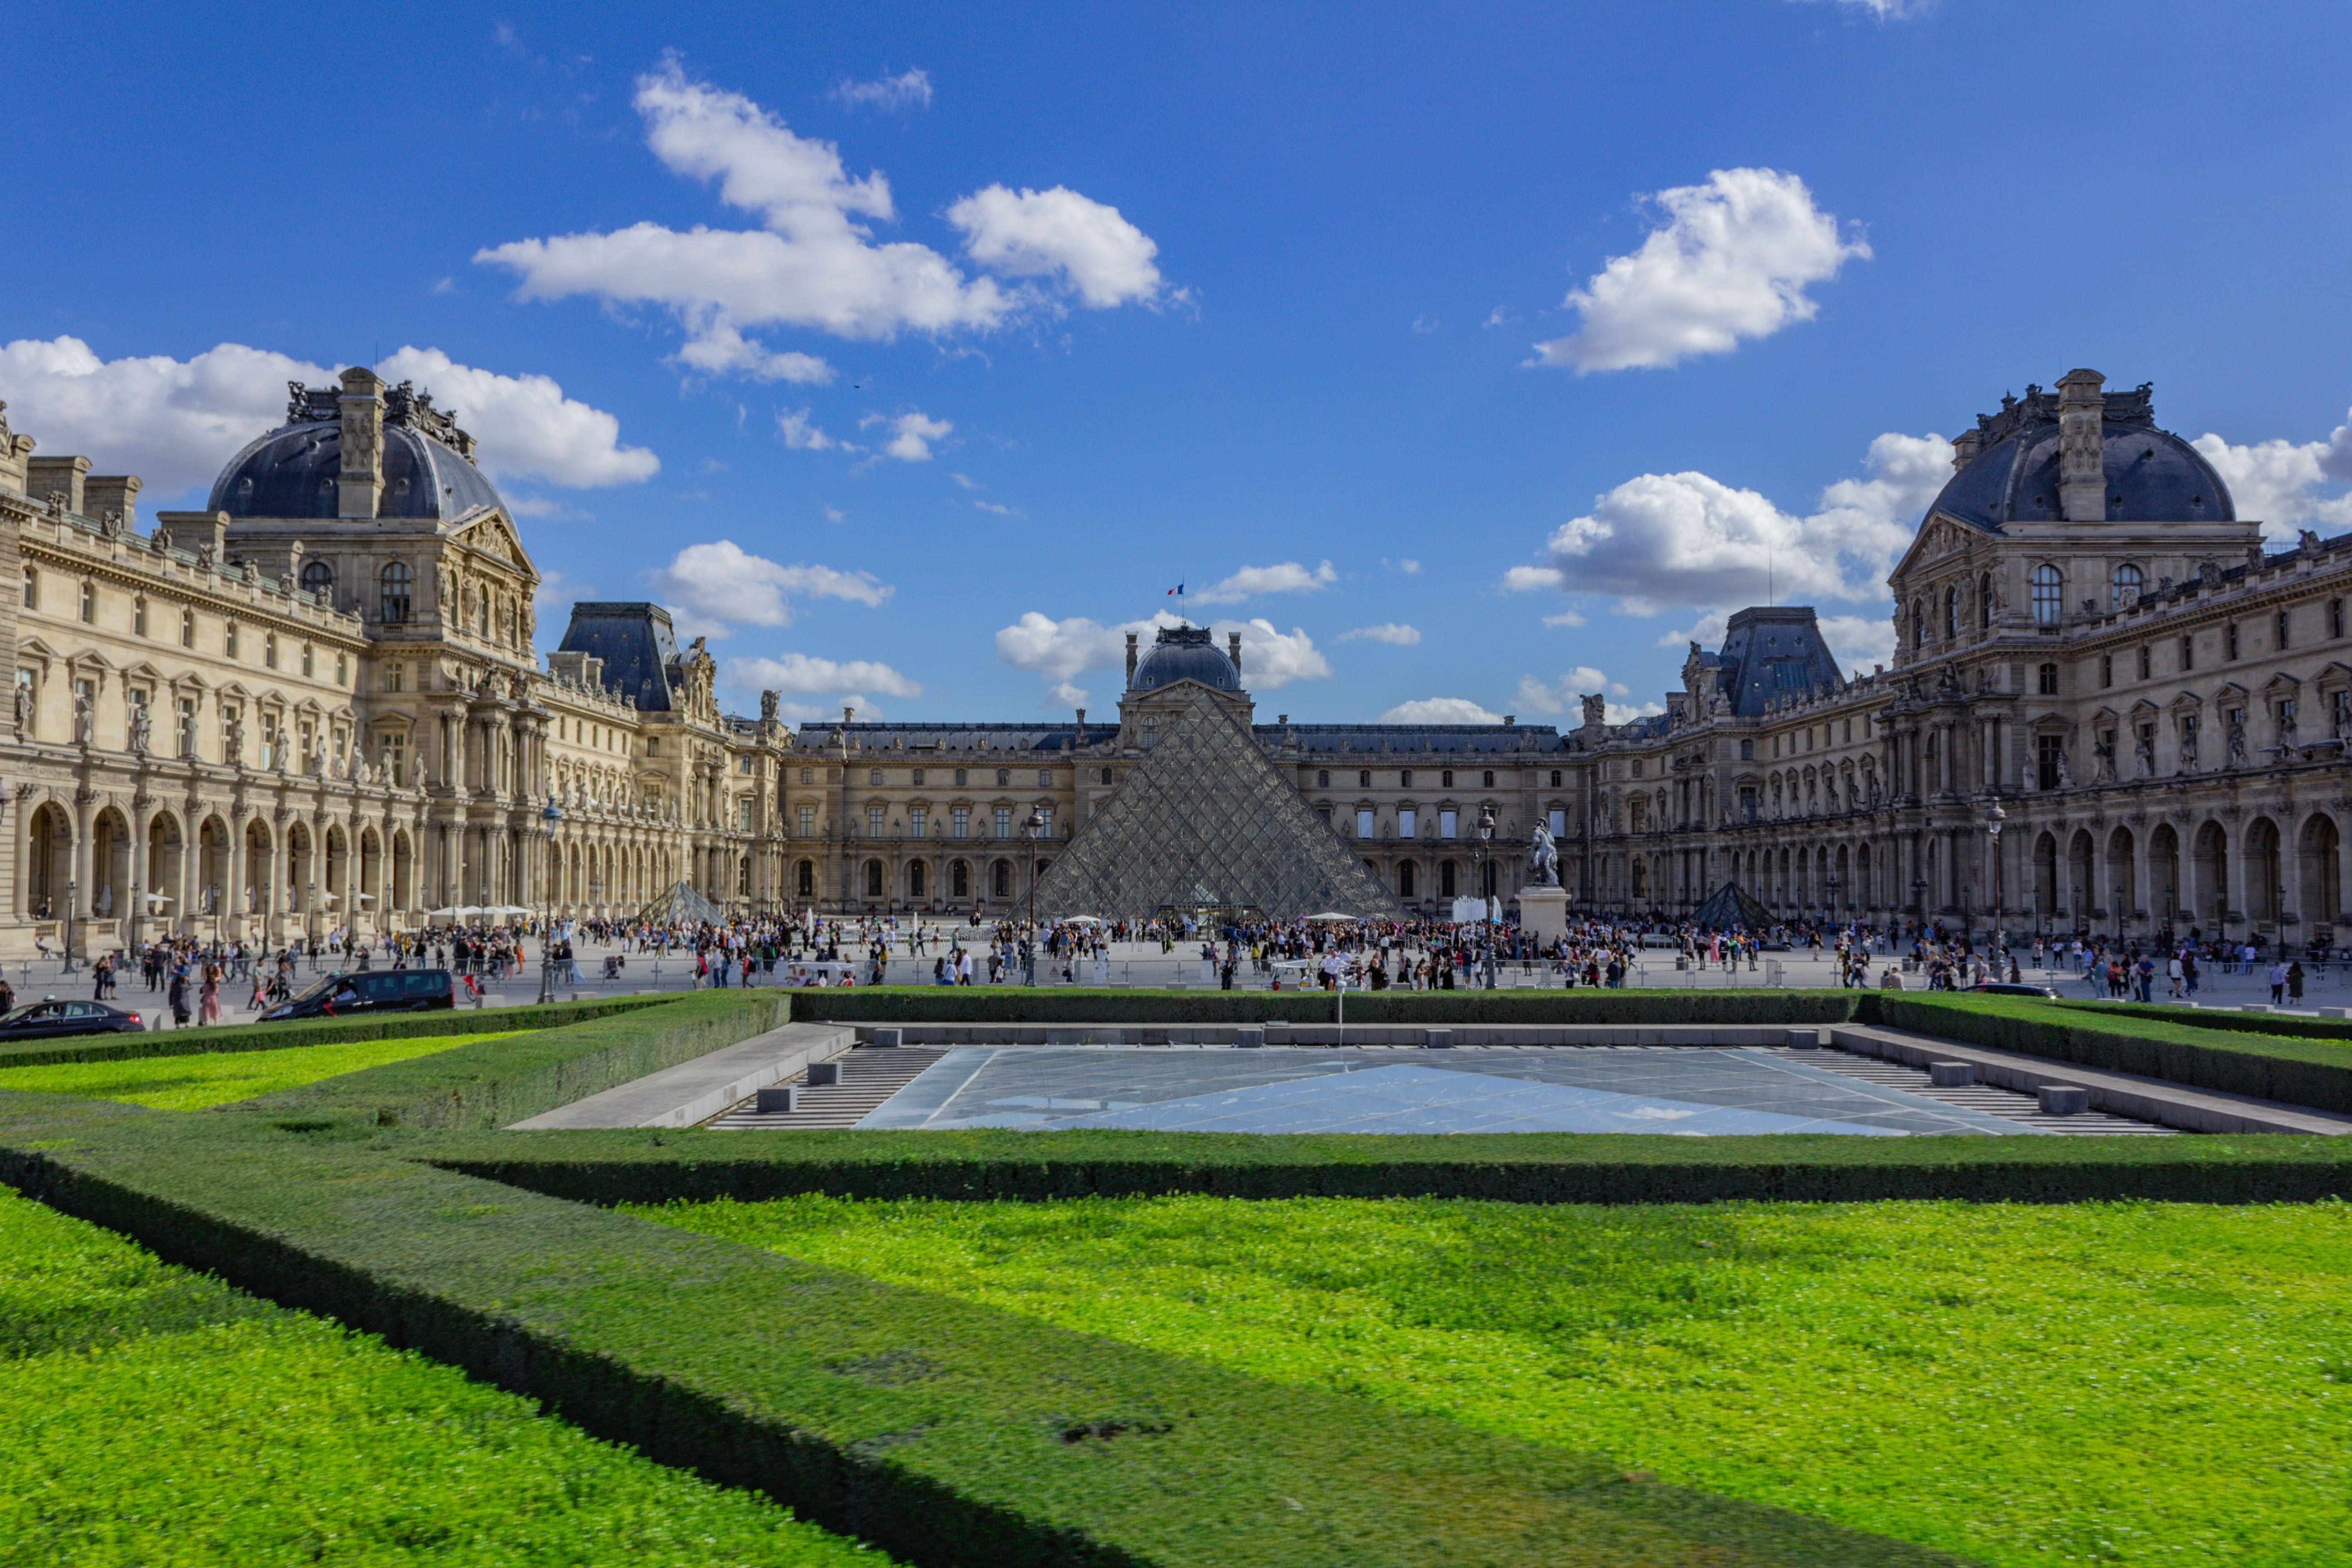 The Majestic Exterior of the Louvre Museum